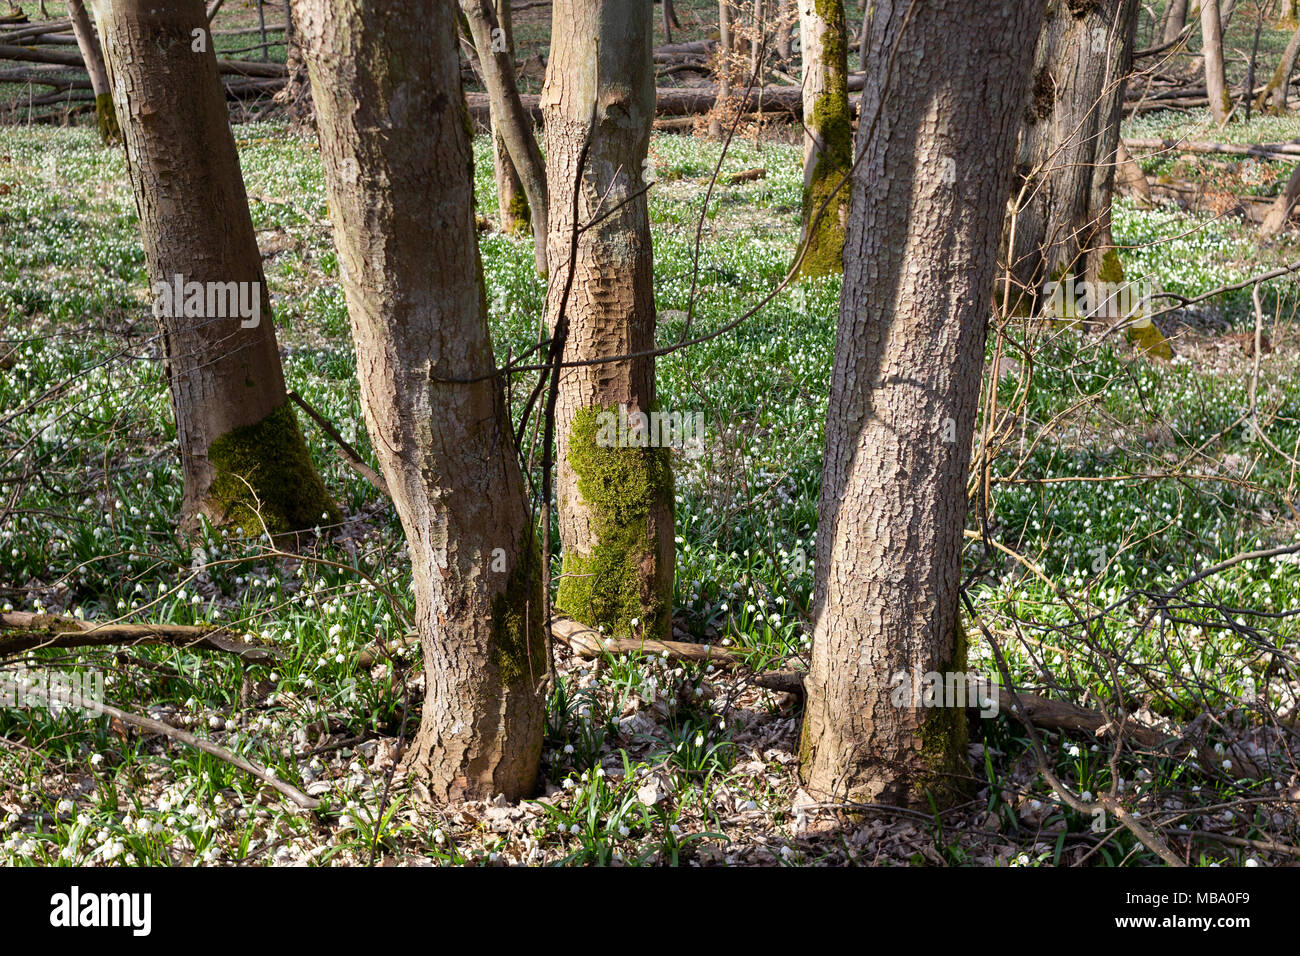 Murowana Goslina, Poland - April 8, 2018. Crowds of people visited the forests this weekend. Snowflakes have blossomed, the first real spring weather of 21 degrees. Recently in Poland a ban on Sunday trading has been introduced, which certainly contributed to this form of spending time. Credit: Slawomir Kowalewski/Alamy Live News Stock Photo